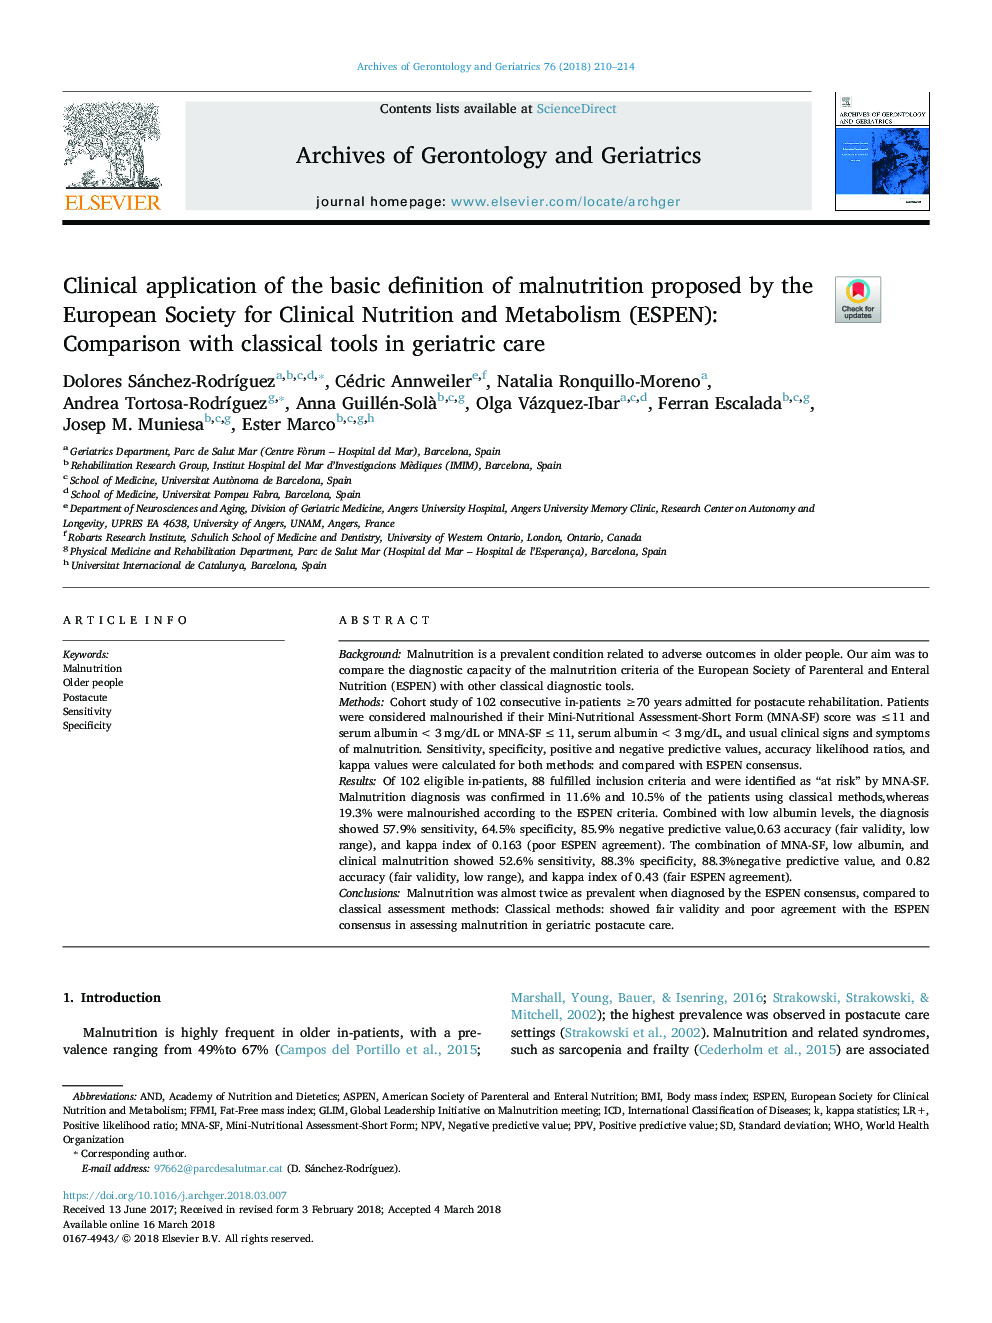 Clinical application of the basic definition of malnutrition proposed by the European Society for Clinical Nutrition and Metabolism (ESPEN): Comparison with classical tools in geriatric care